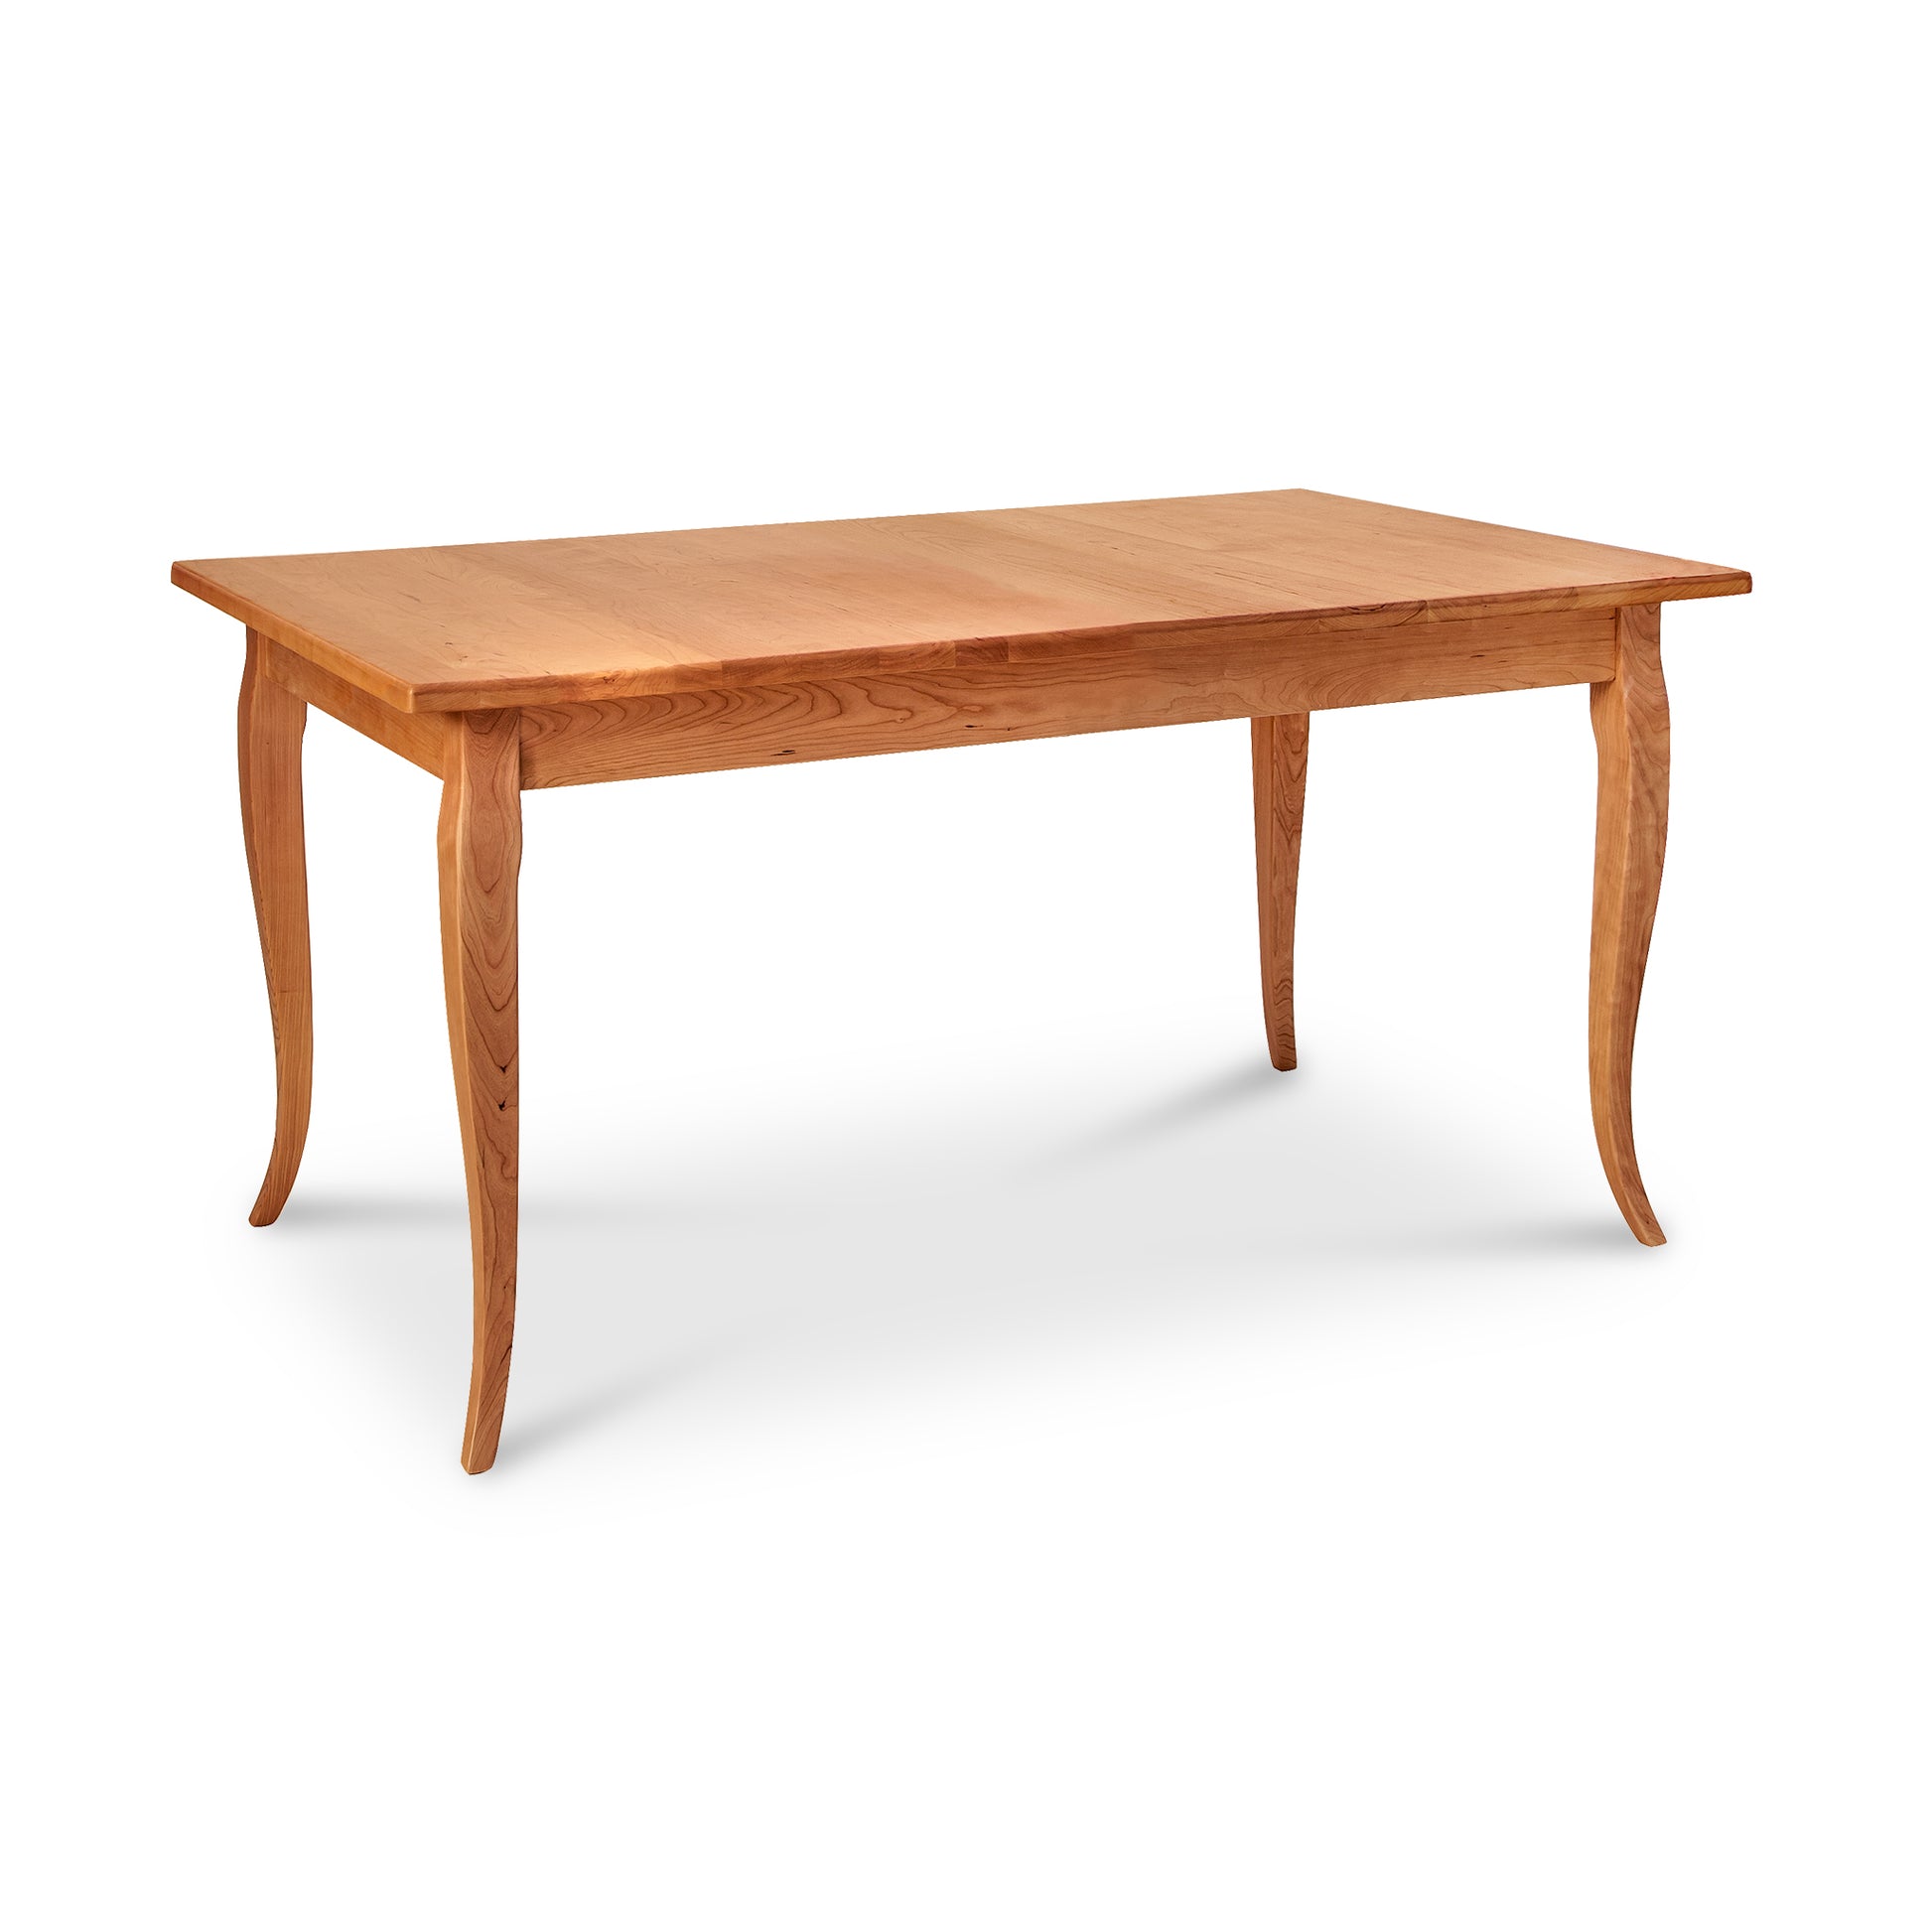 A Lyndon Furniture French Country Solid Top Dining Table with a solid wooden top and legs.